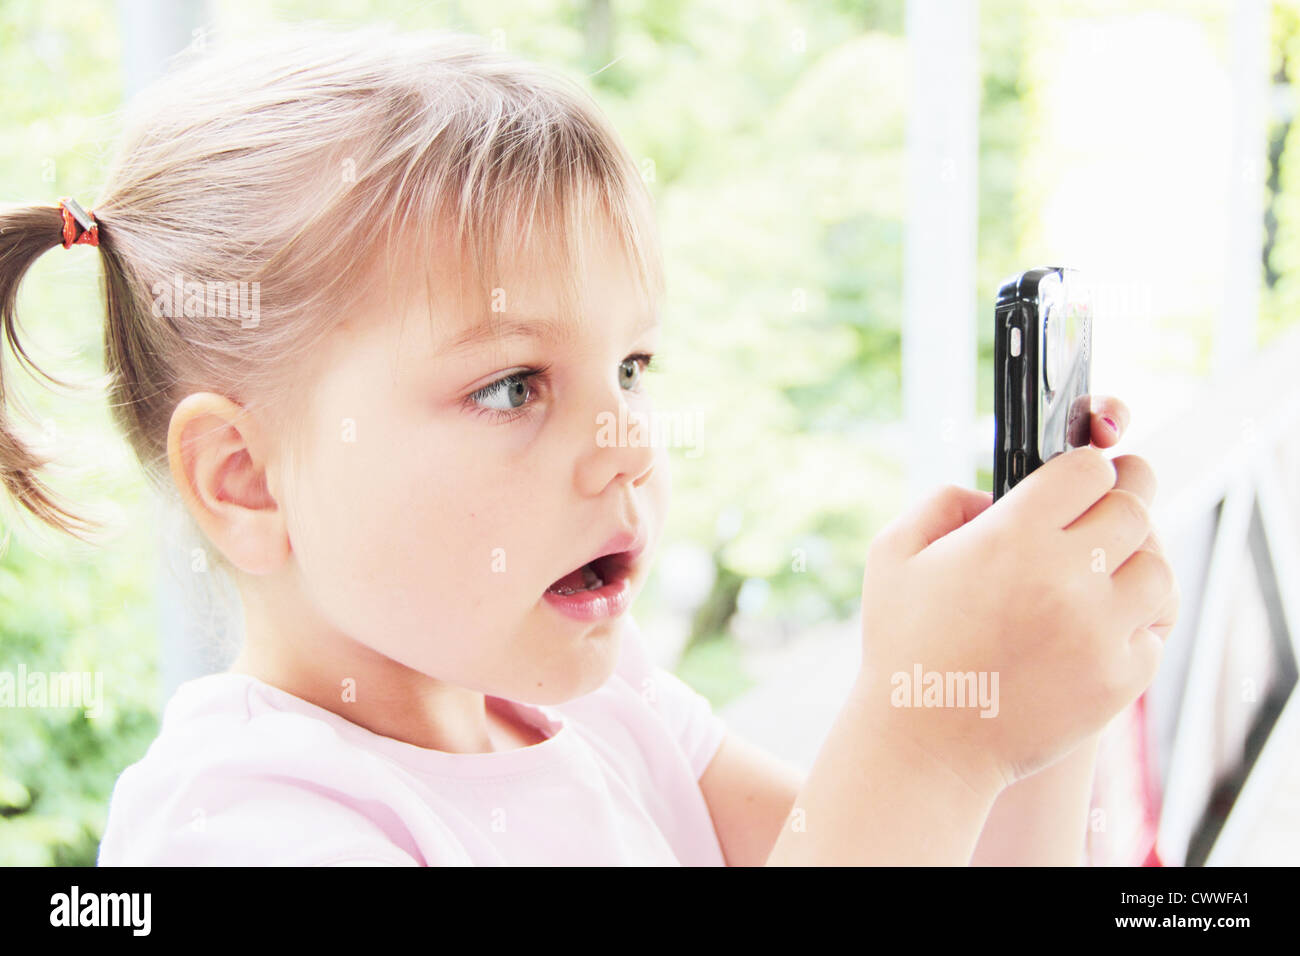 Toddler playing with cell phone Stock Photo